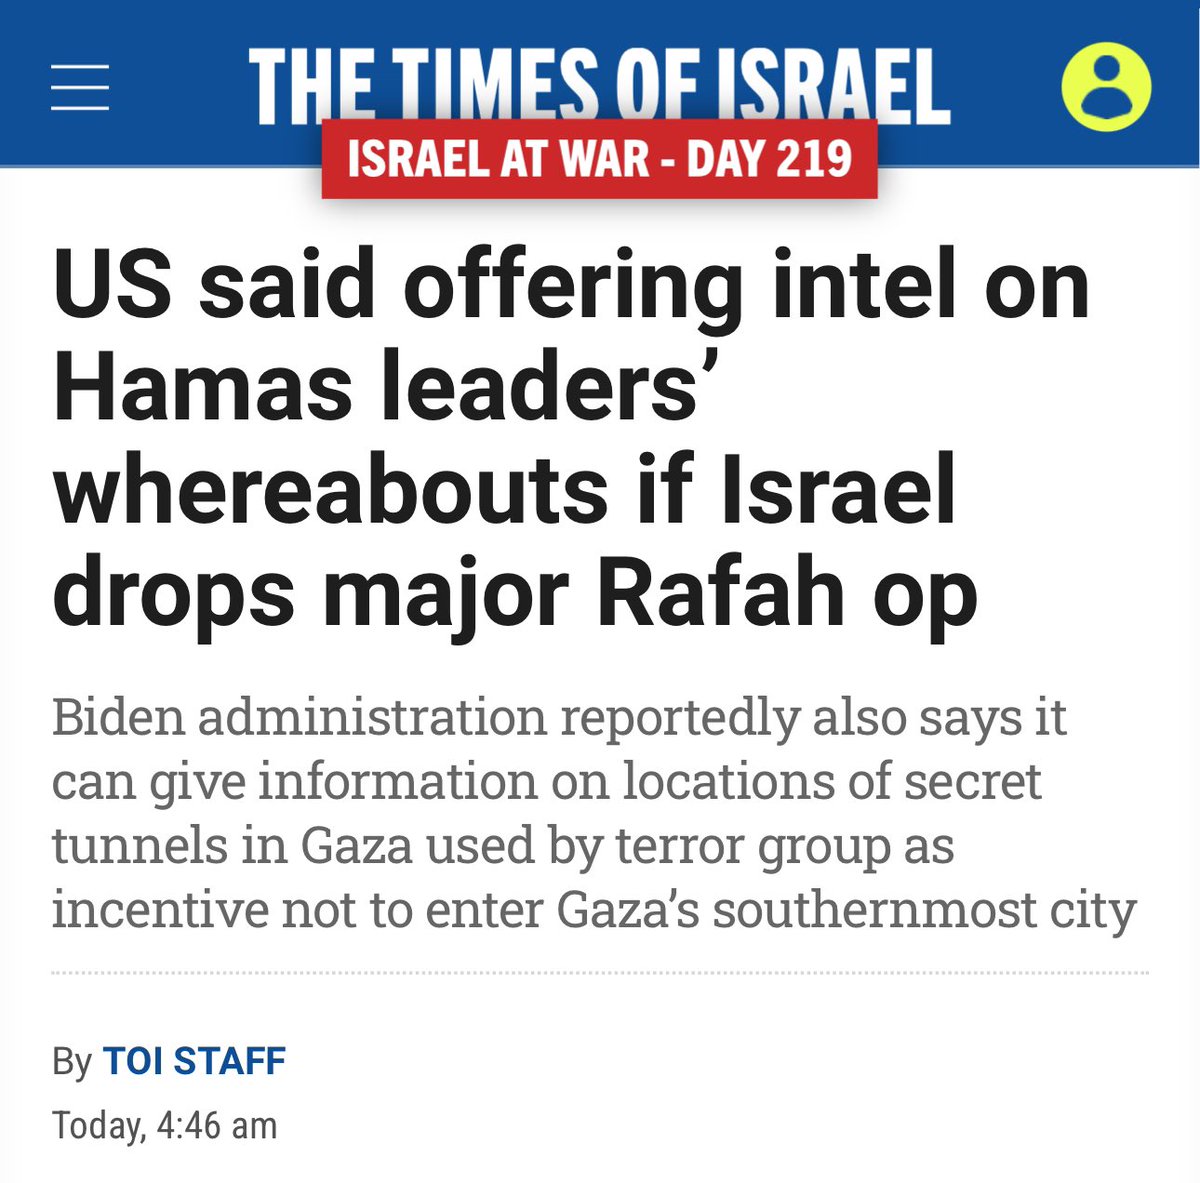 The Biden Admin has some serious explaining to do, if it has withheld intelligence on the location of Hamas leaders, tunnels and presumably hostages (incl. American nationals)!